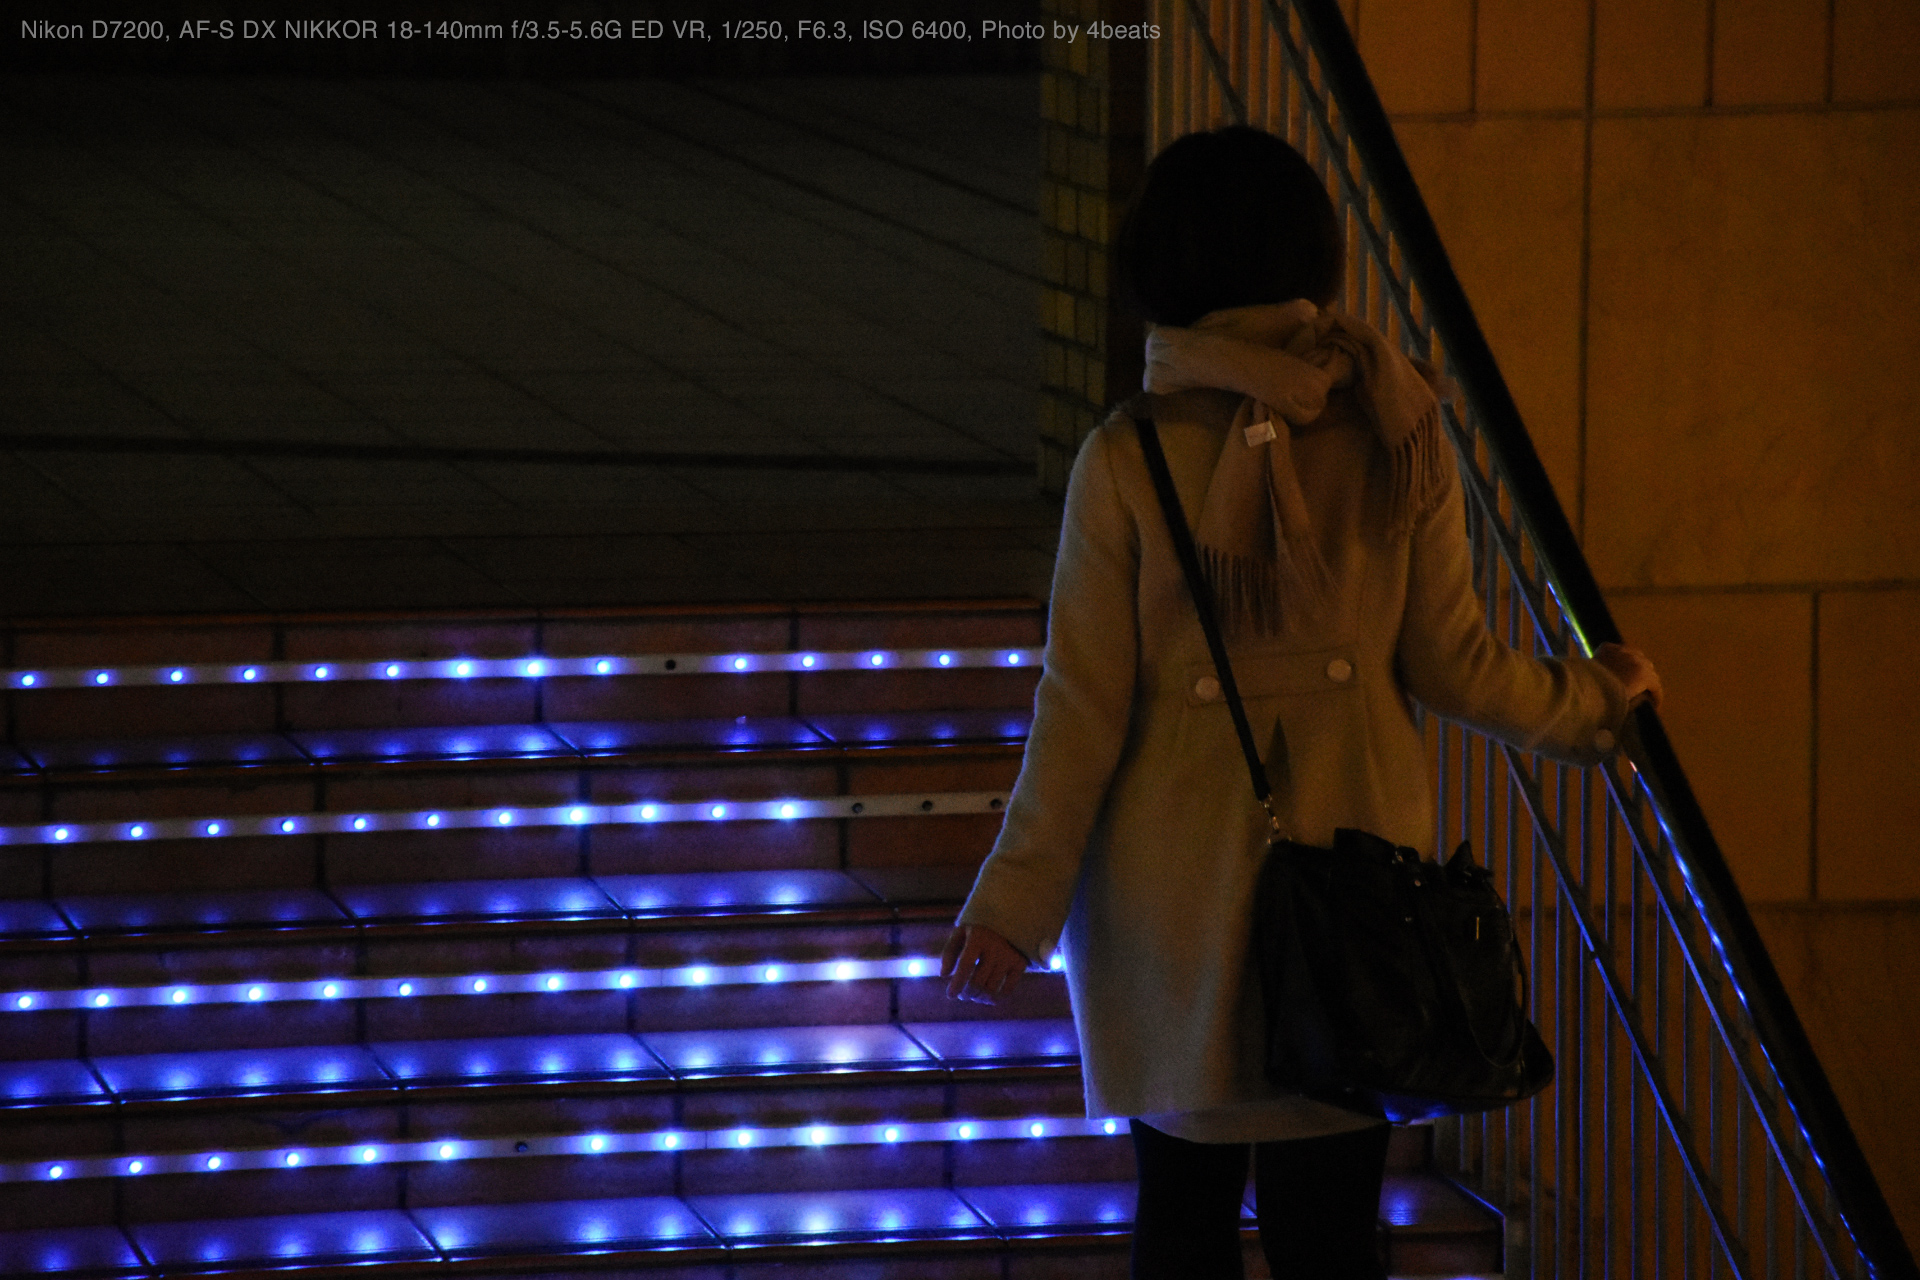 Nikon D7200, AF-S DX NIKKOR 18-140mm f/3.5-5.6G ED VR, 1/250, F6.3, ISO 6400, Photo by 4beats